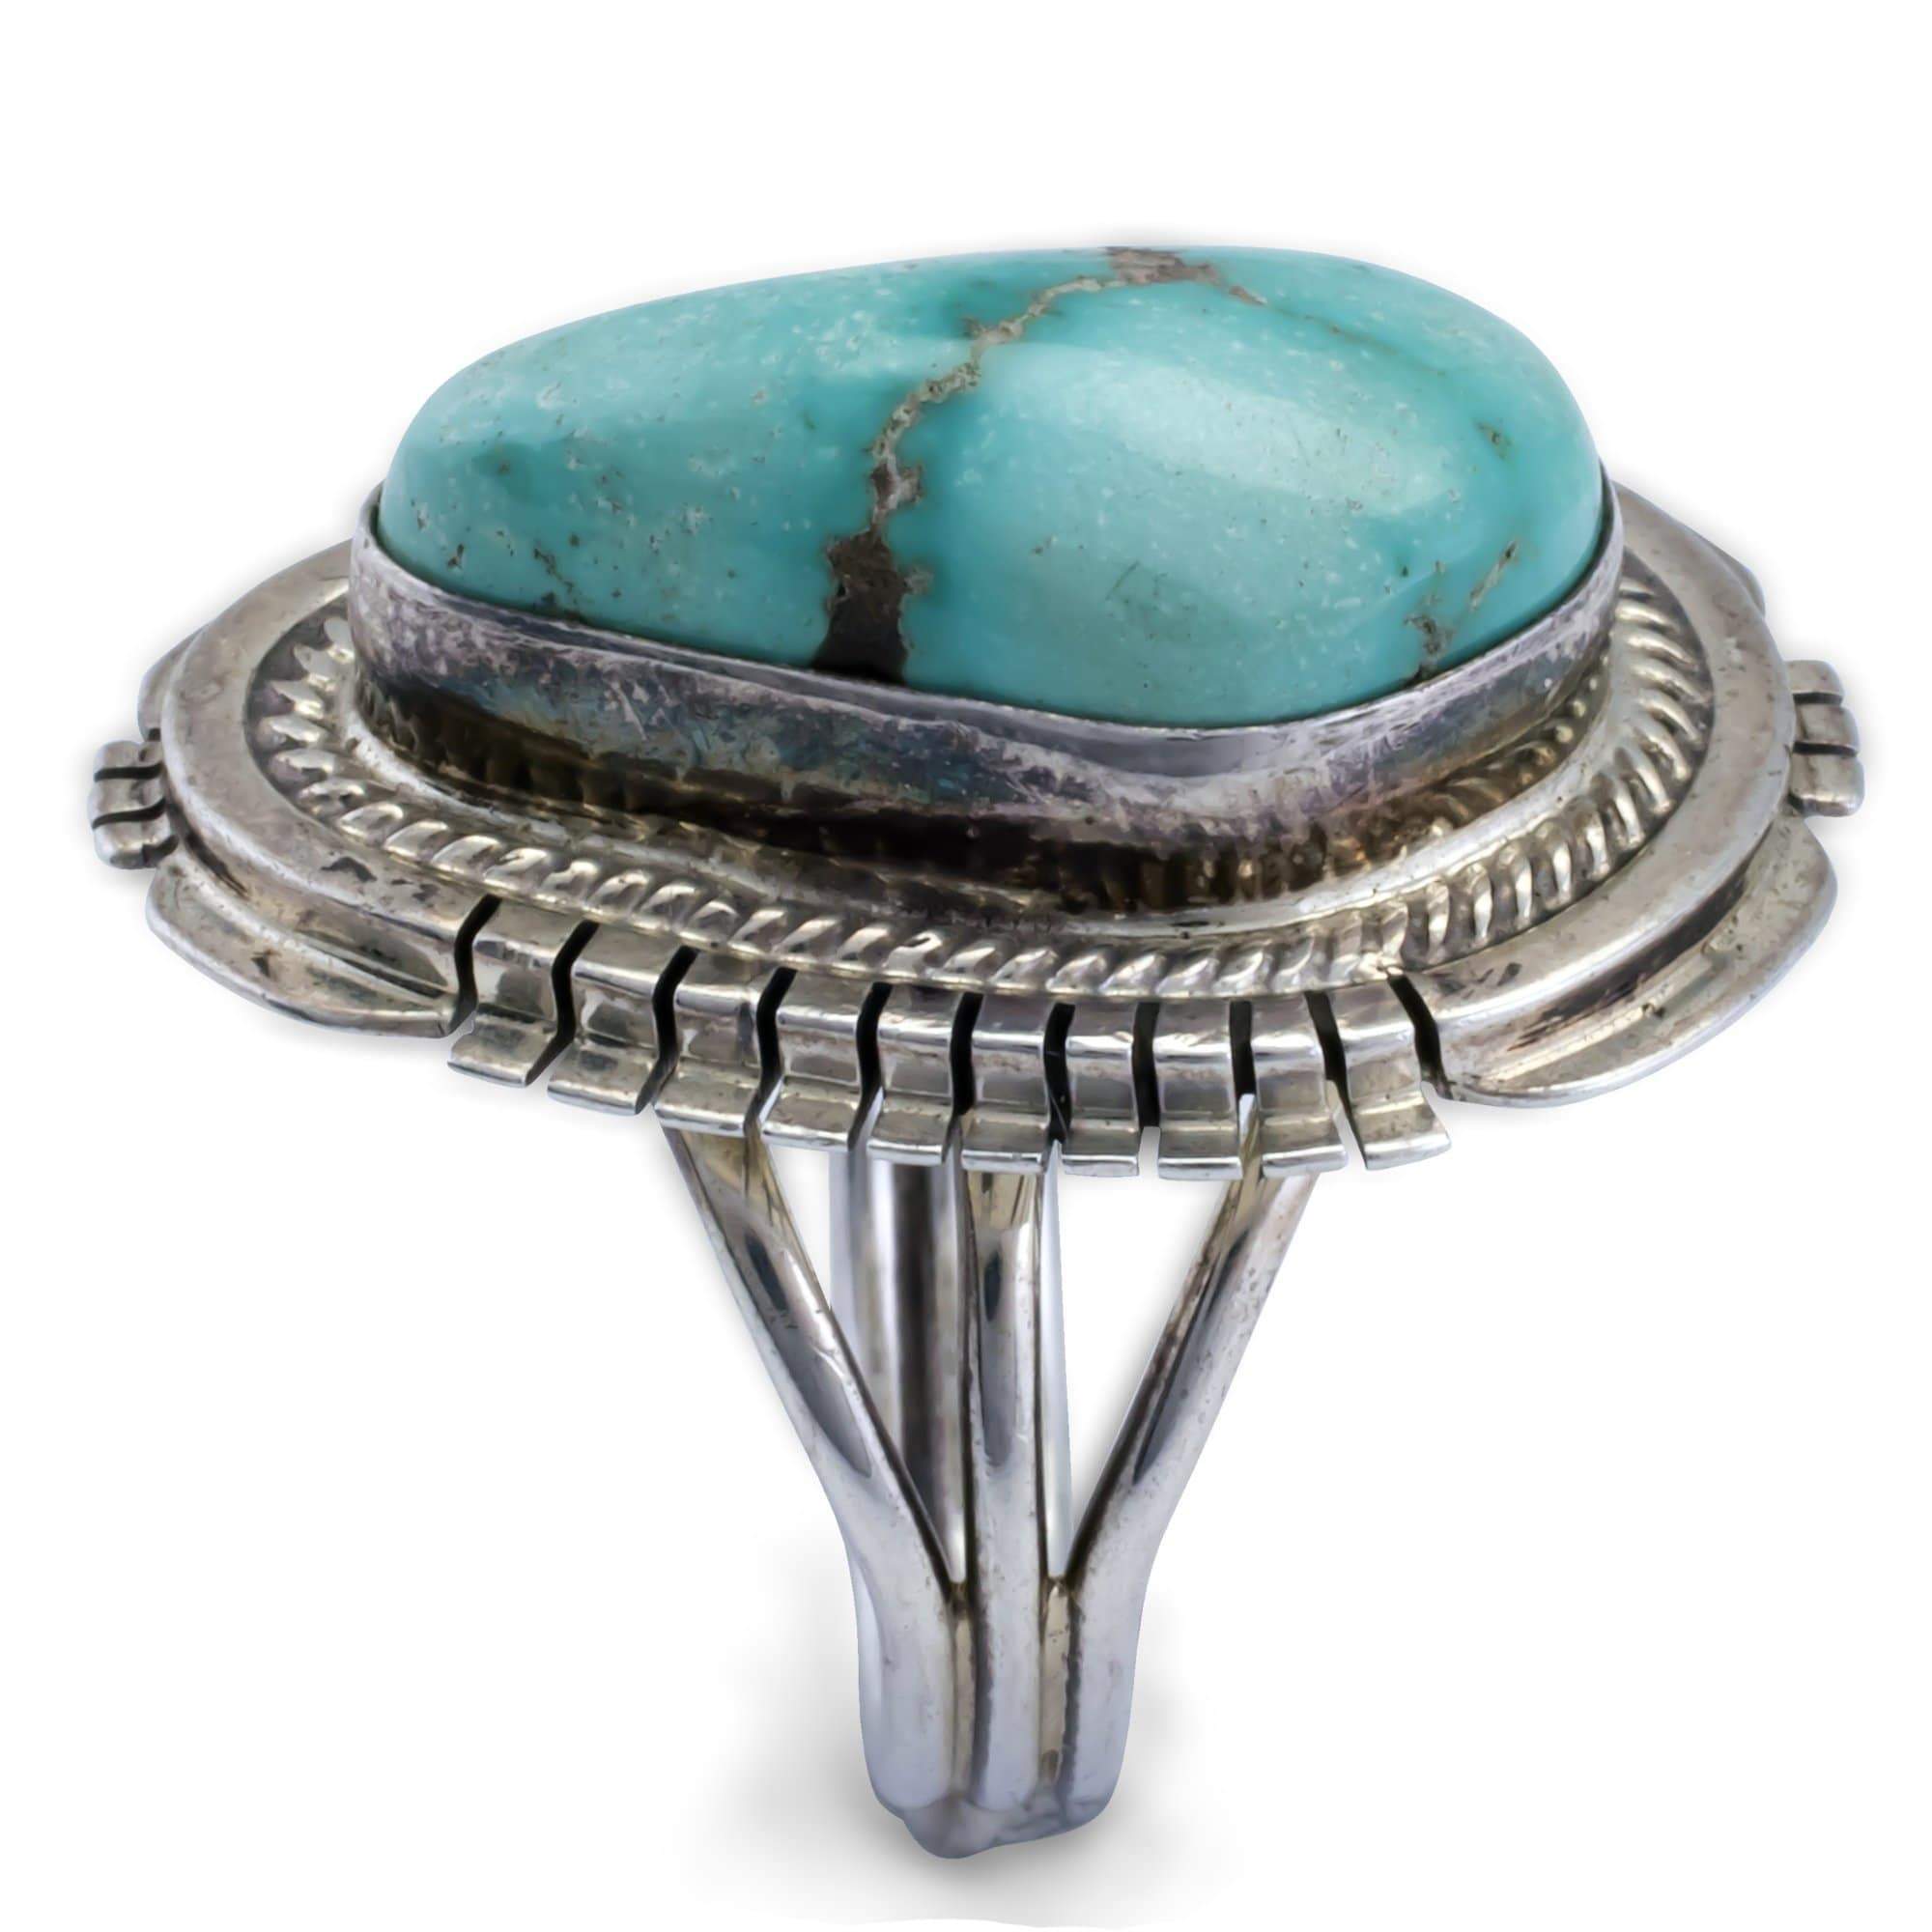 Kalifano Native American Jewelry 5 Kevin Willie Fox Turquoise Native American Made 925 Sterling Silver Ring NAR400.016.5